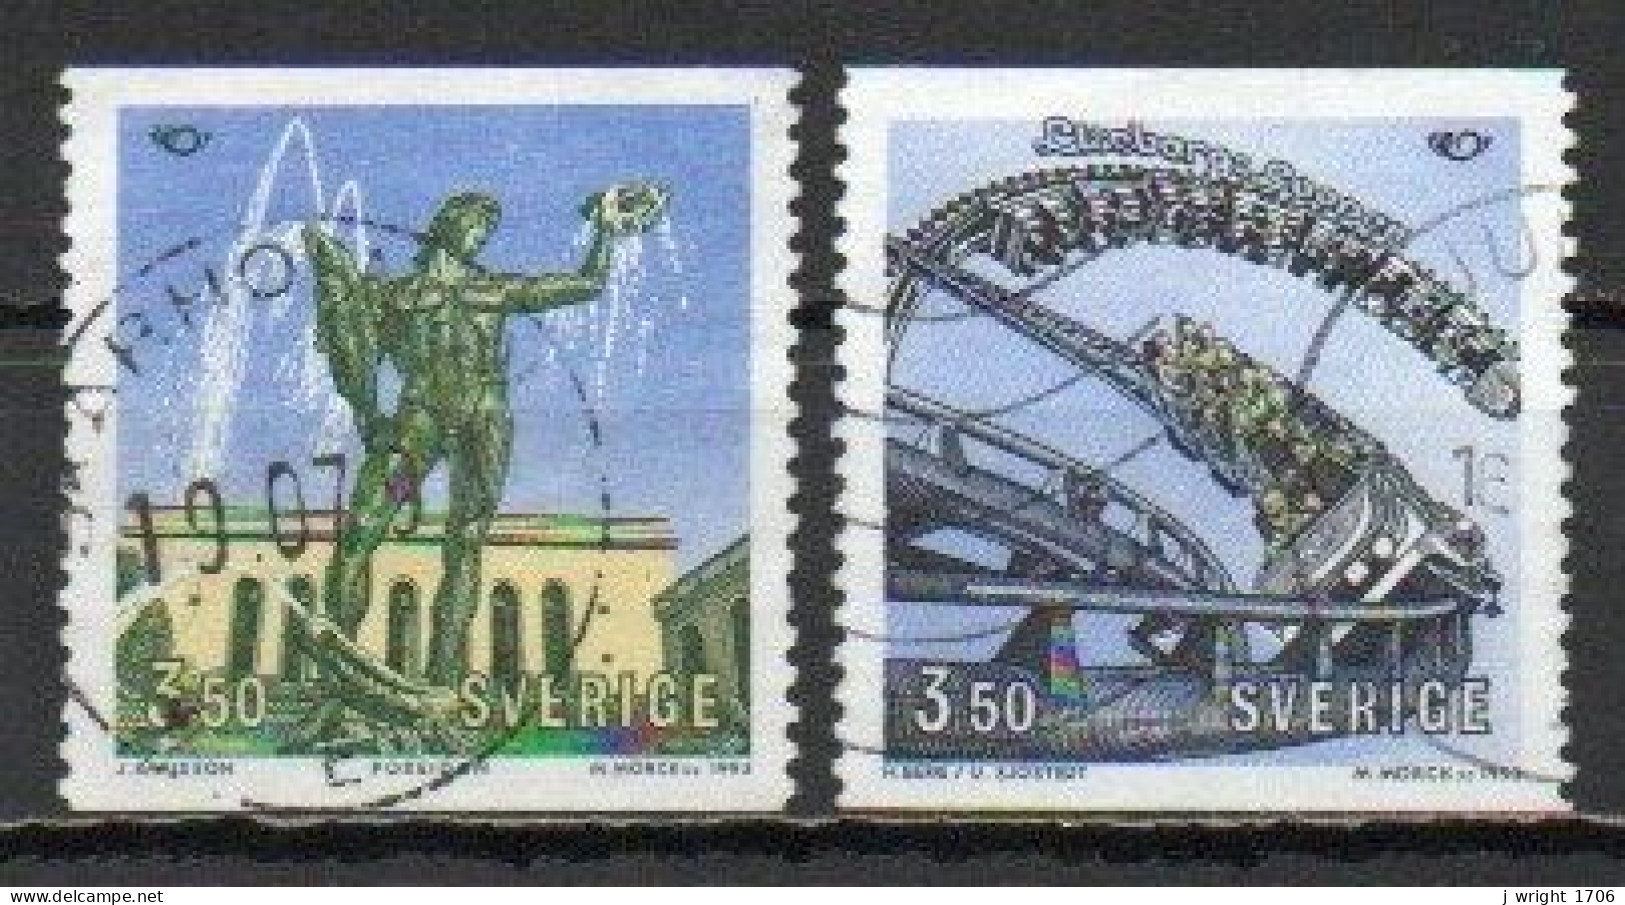 Sweden, 1993, Nordic Co-operation, Set, USED - Used Stamps